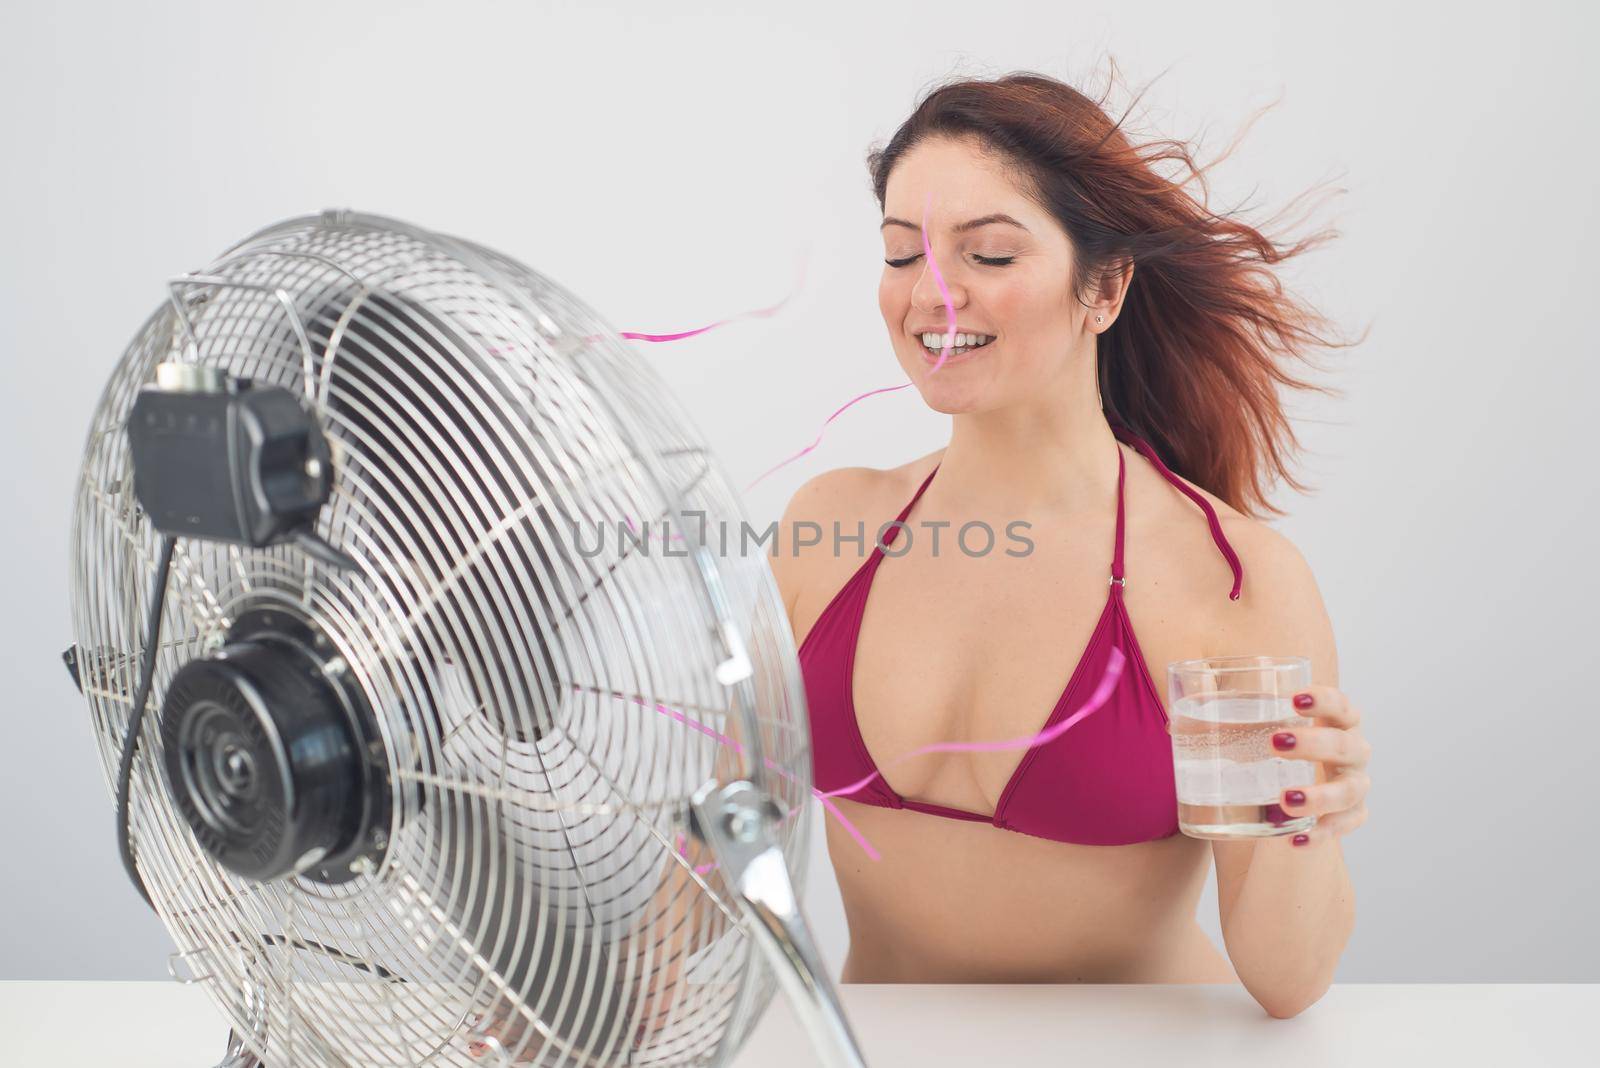 Red-haired smiling woman in a bikini drinks a cold drink and enjoys the blowing wind from an electric fan on a white background. Climate control on a hot summer day by mrwed54